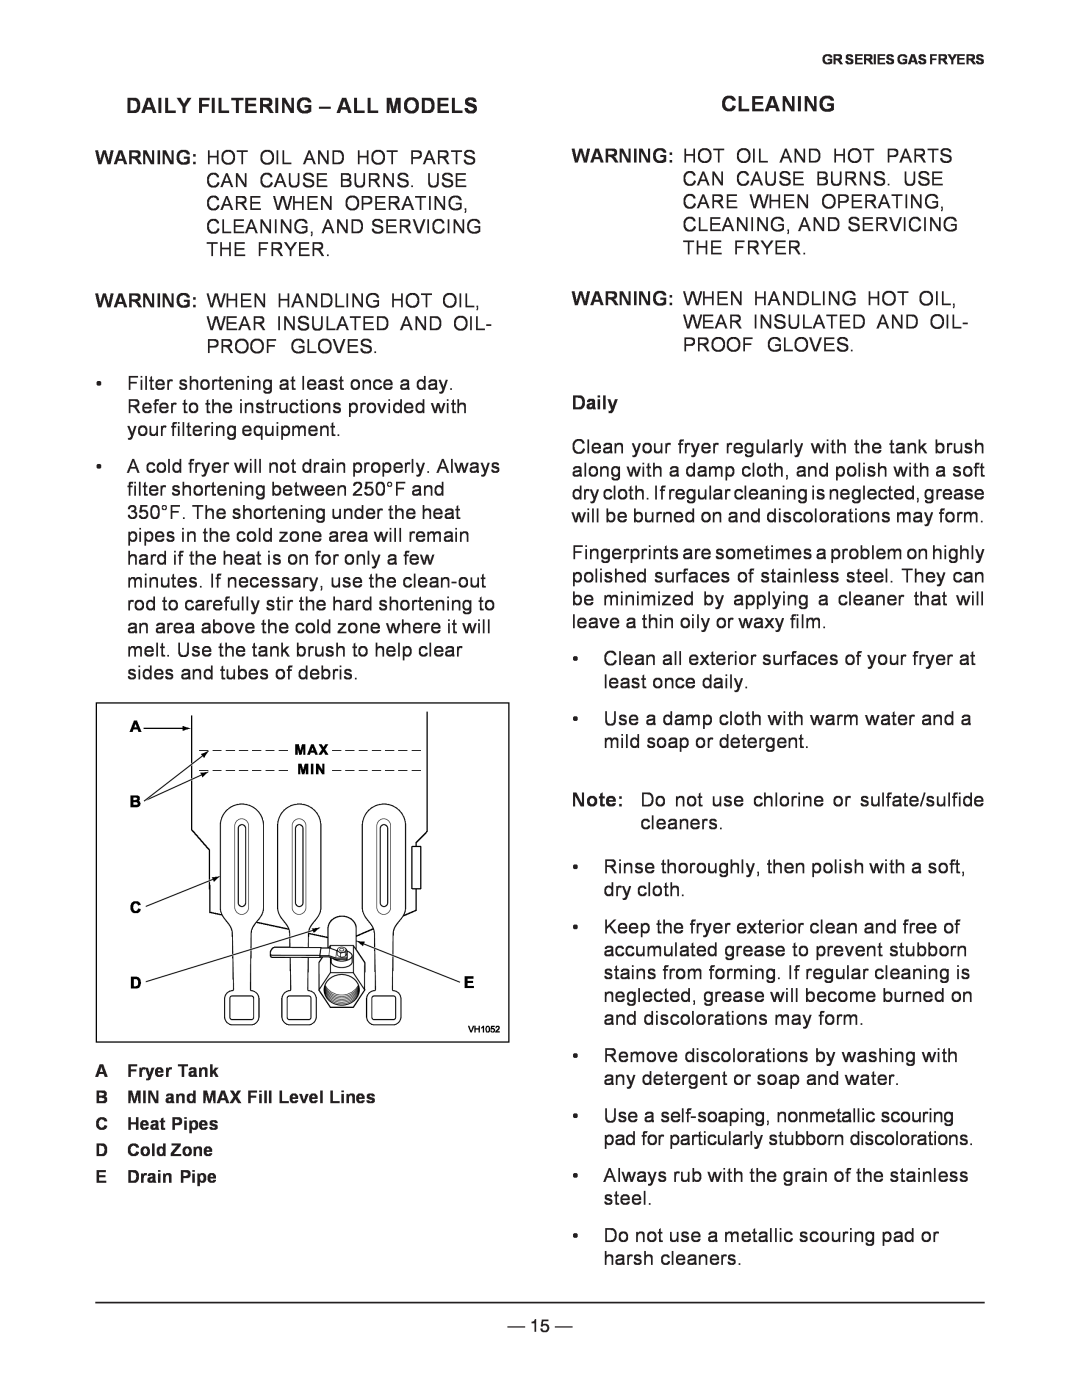 Vulcan-Hart operation manual Daily Filtering - All Models, Cleaning 